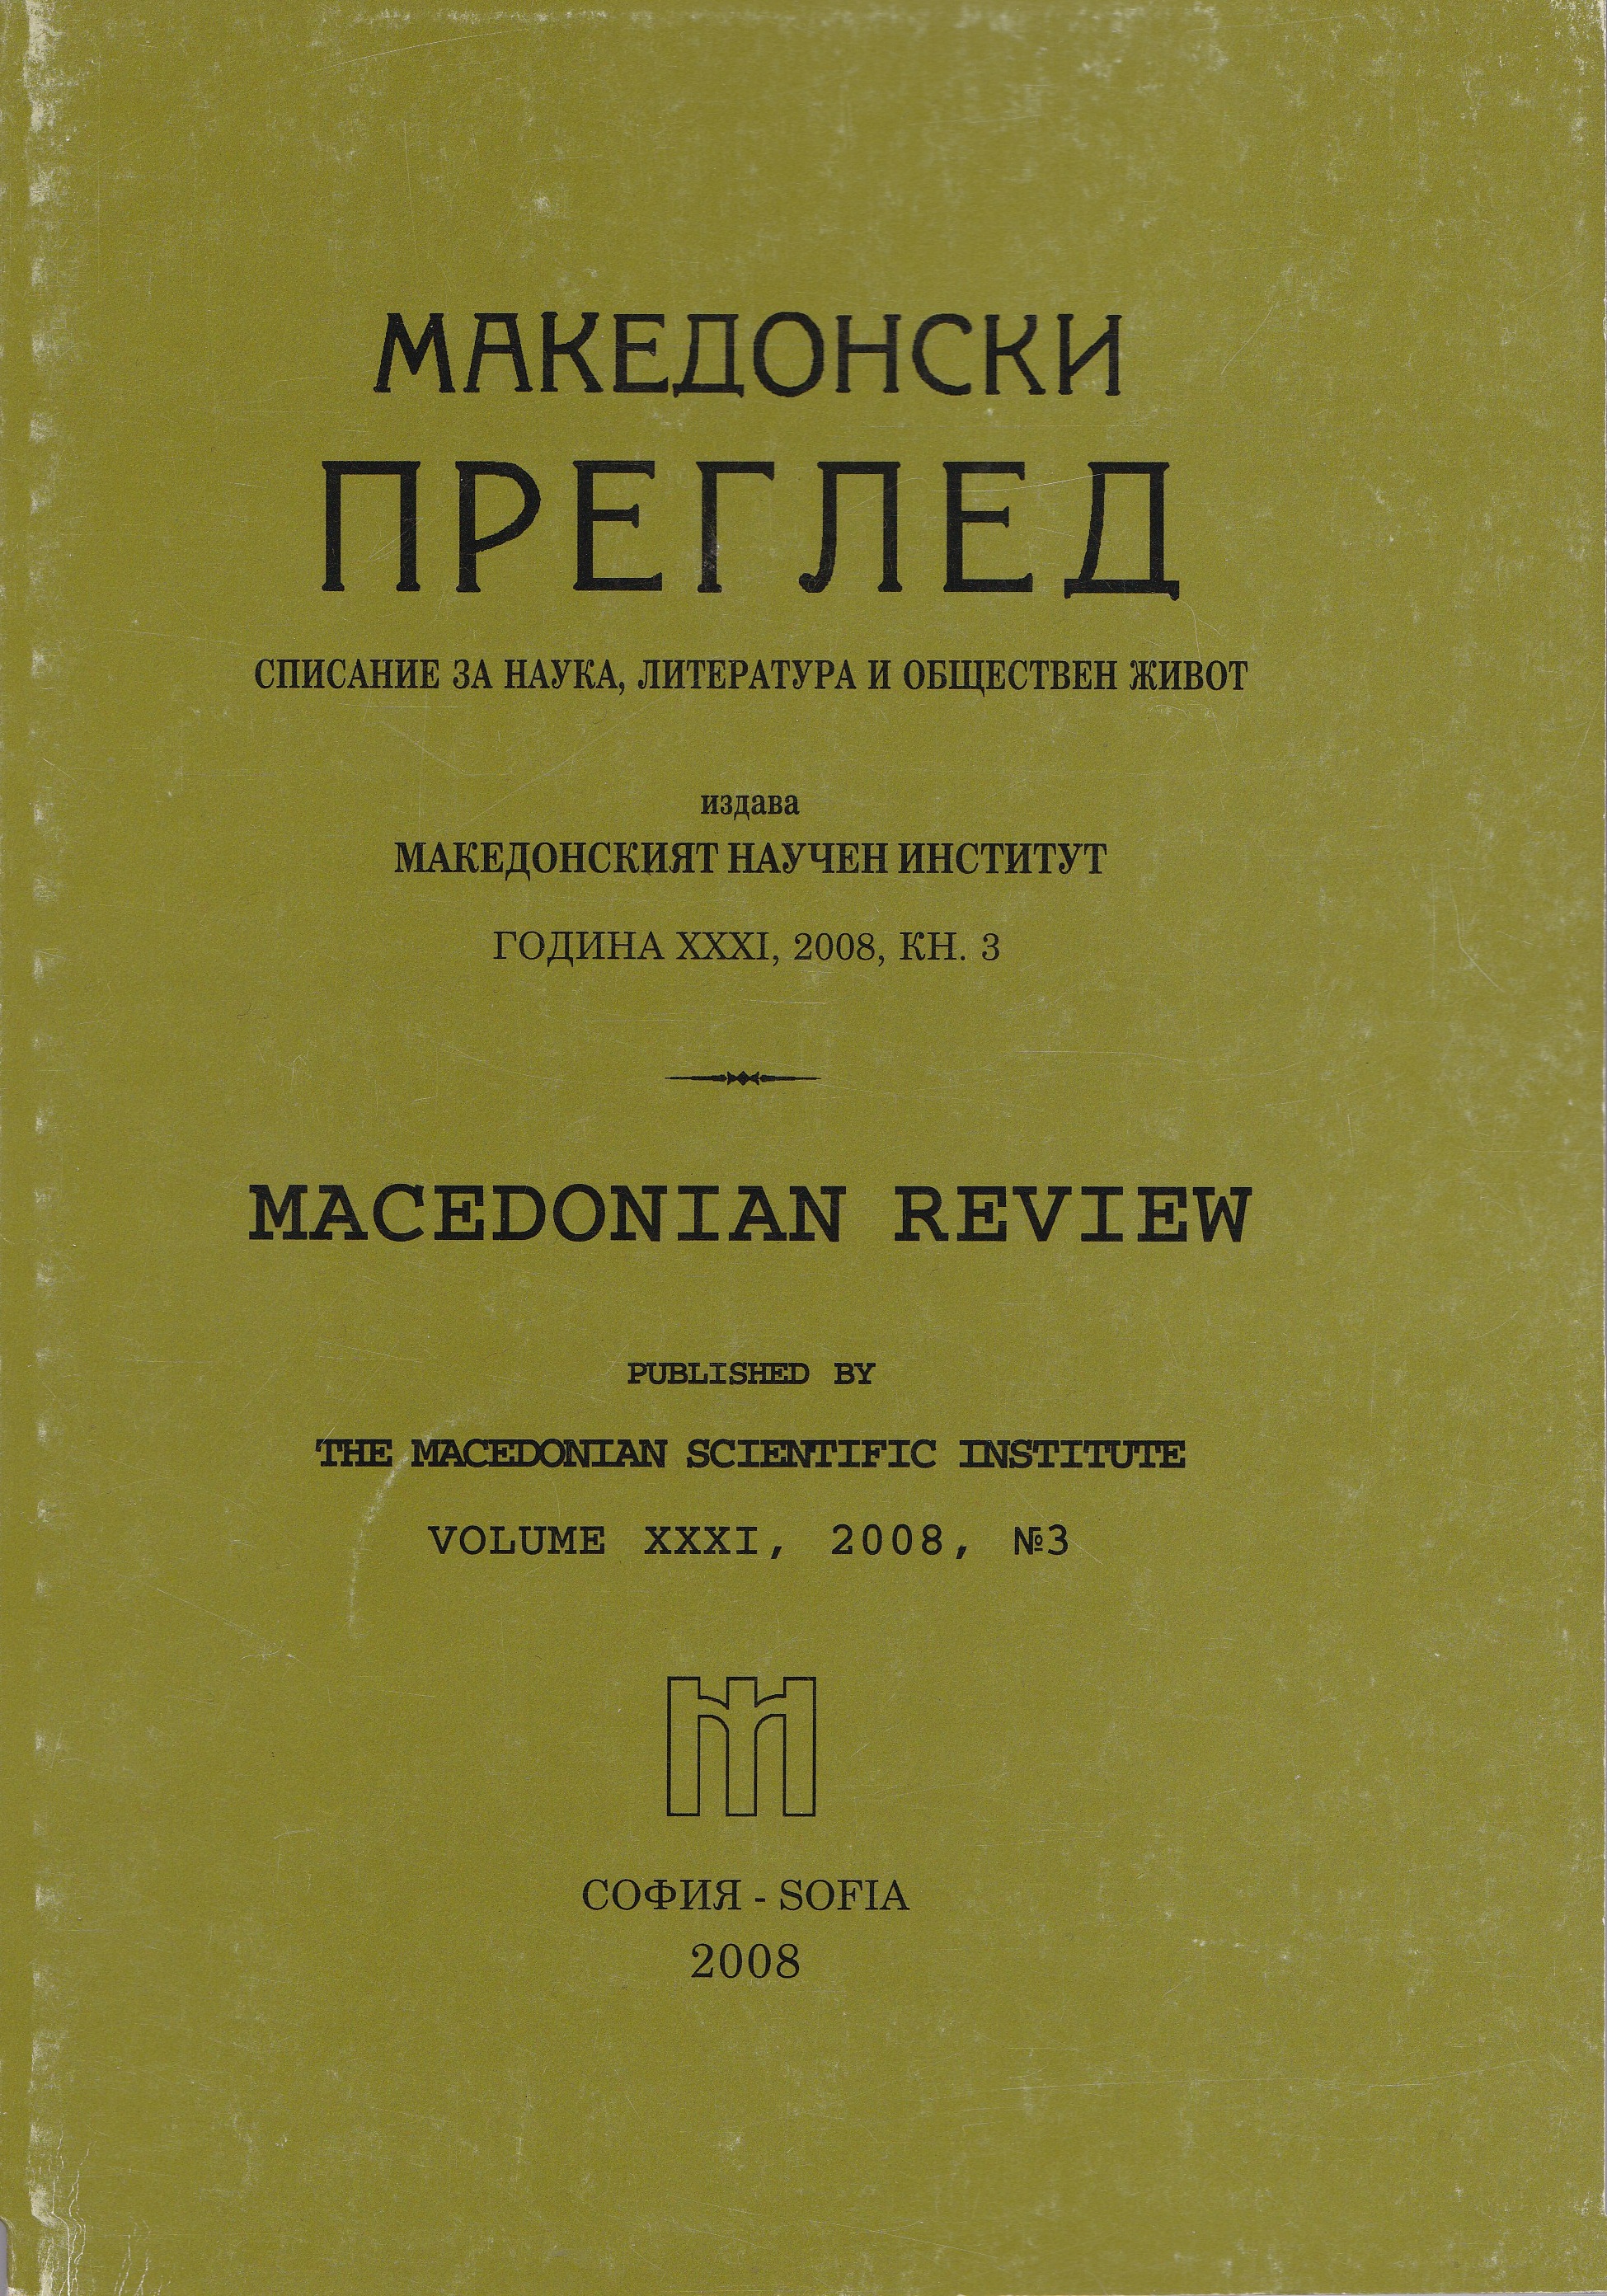 Presentations against the forcing of the idea for „Macedonian nation“ in Bulgaria and the necessity of existing of the Macedonian Scientific Institute (November 1946 - July 1947) (Continuation from vol. 2) Cover Image